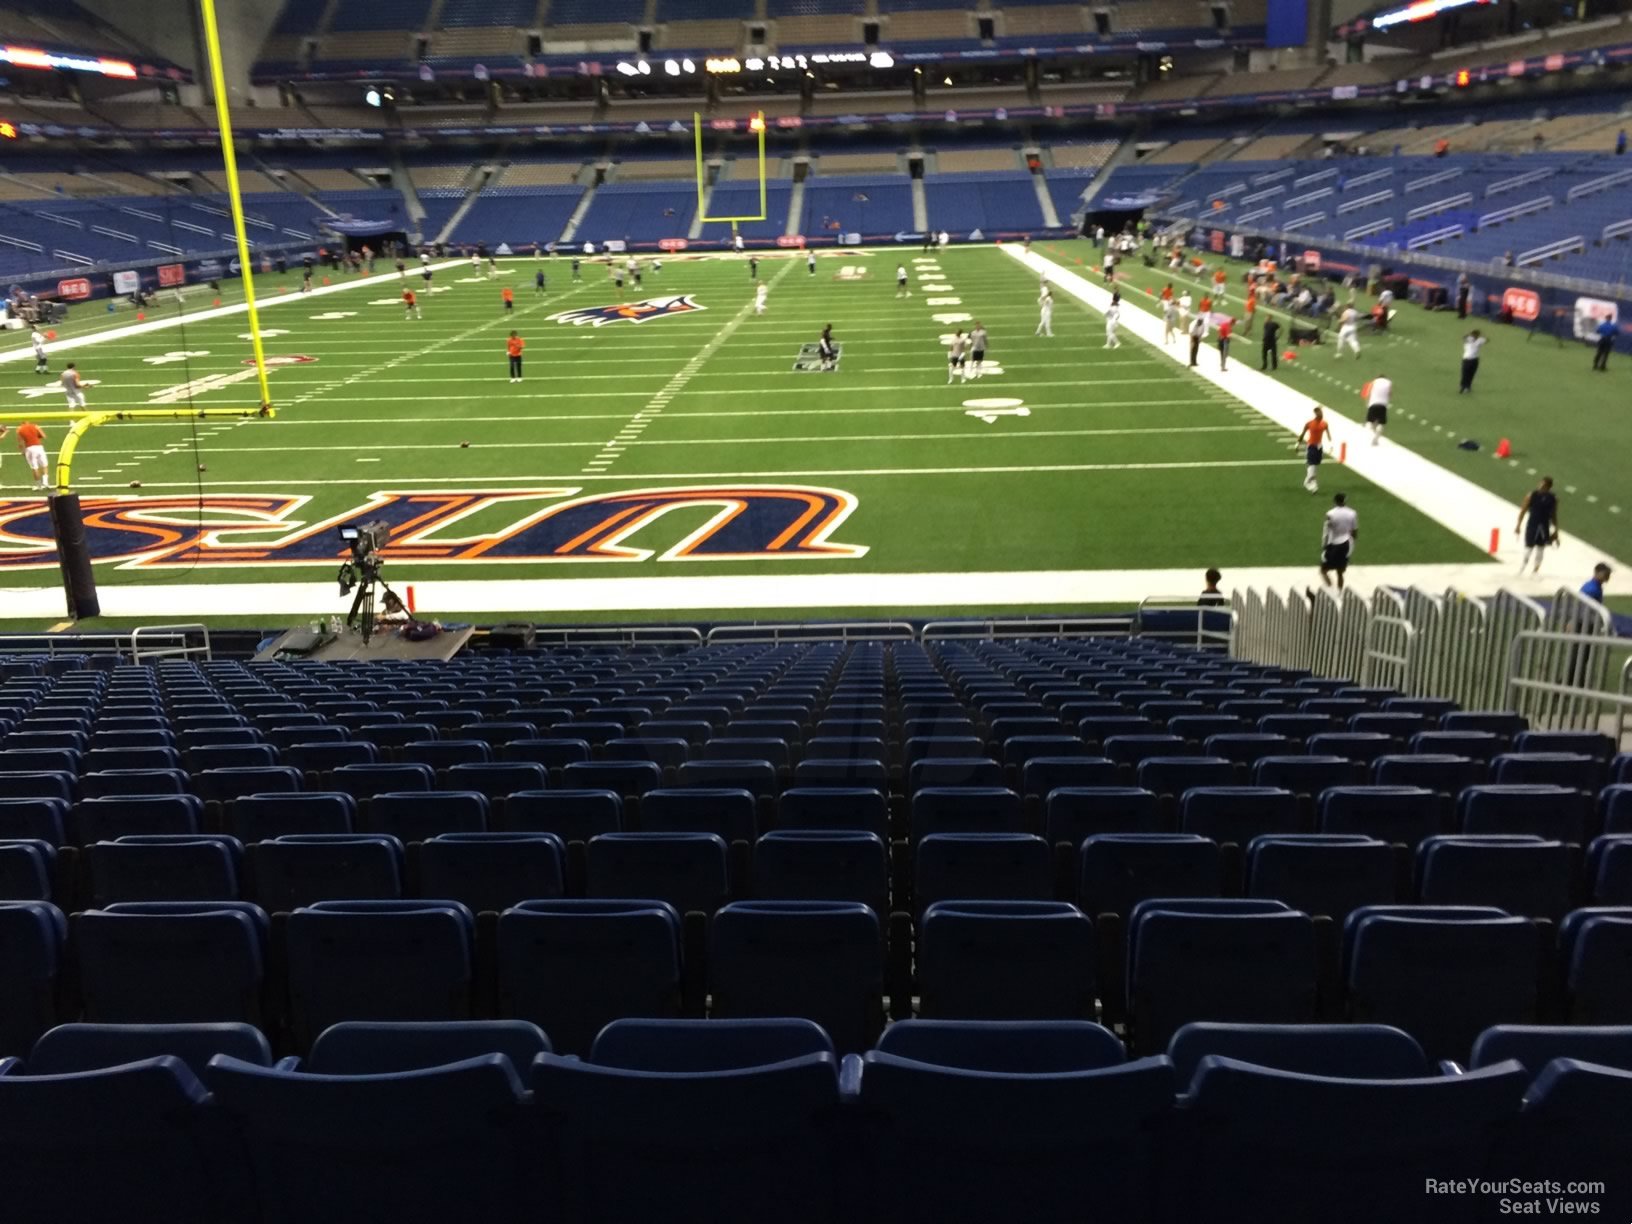 section 122, row 18 seat view  for football - alamodome